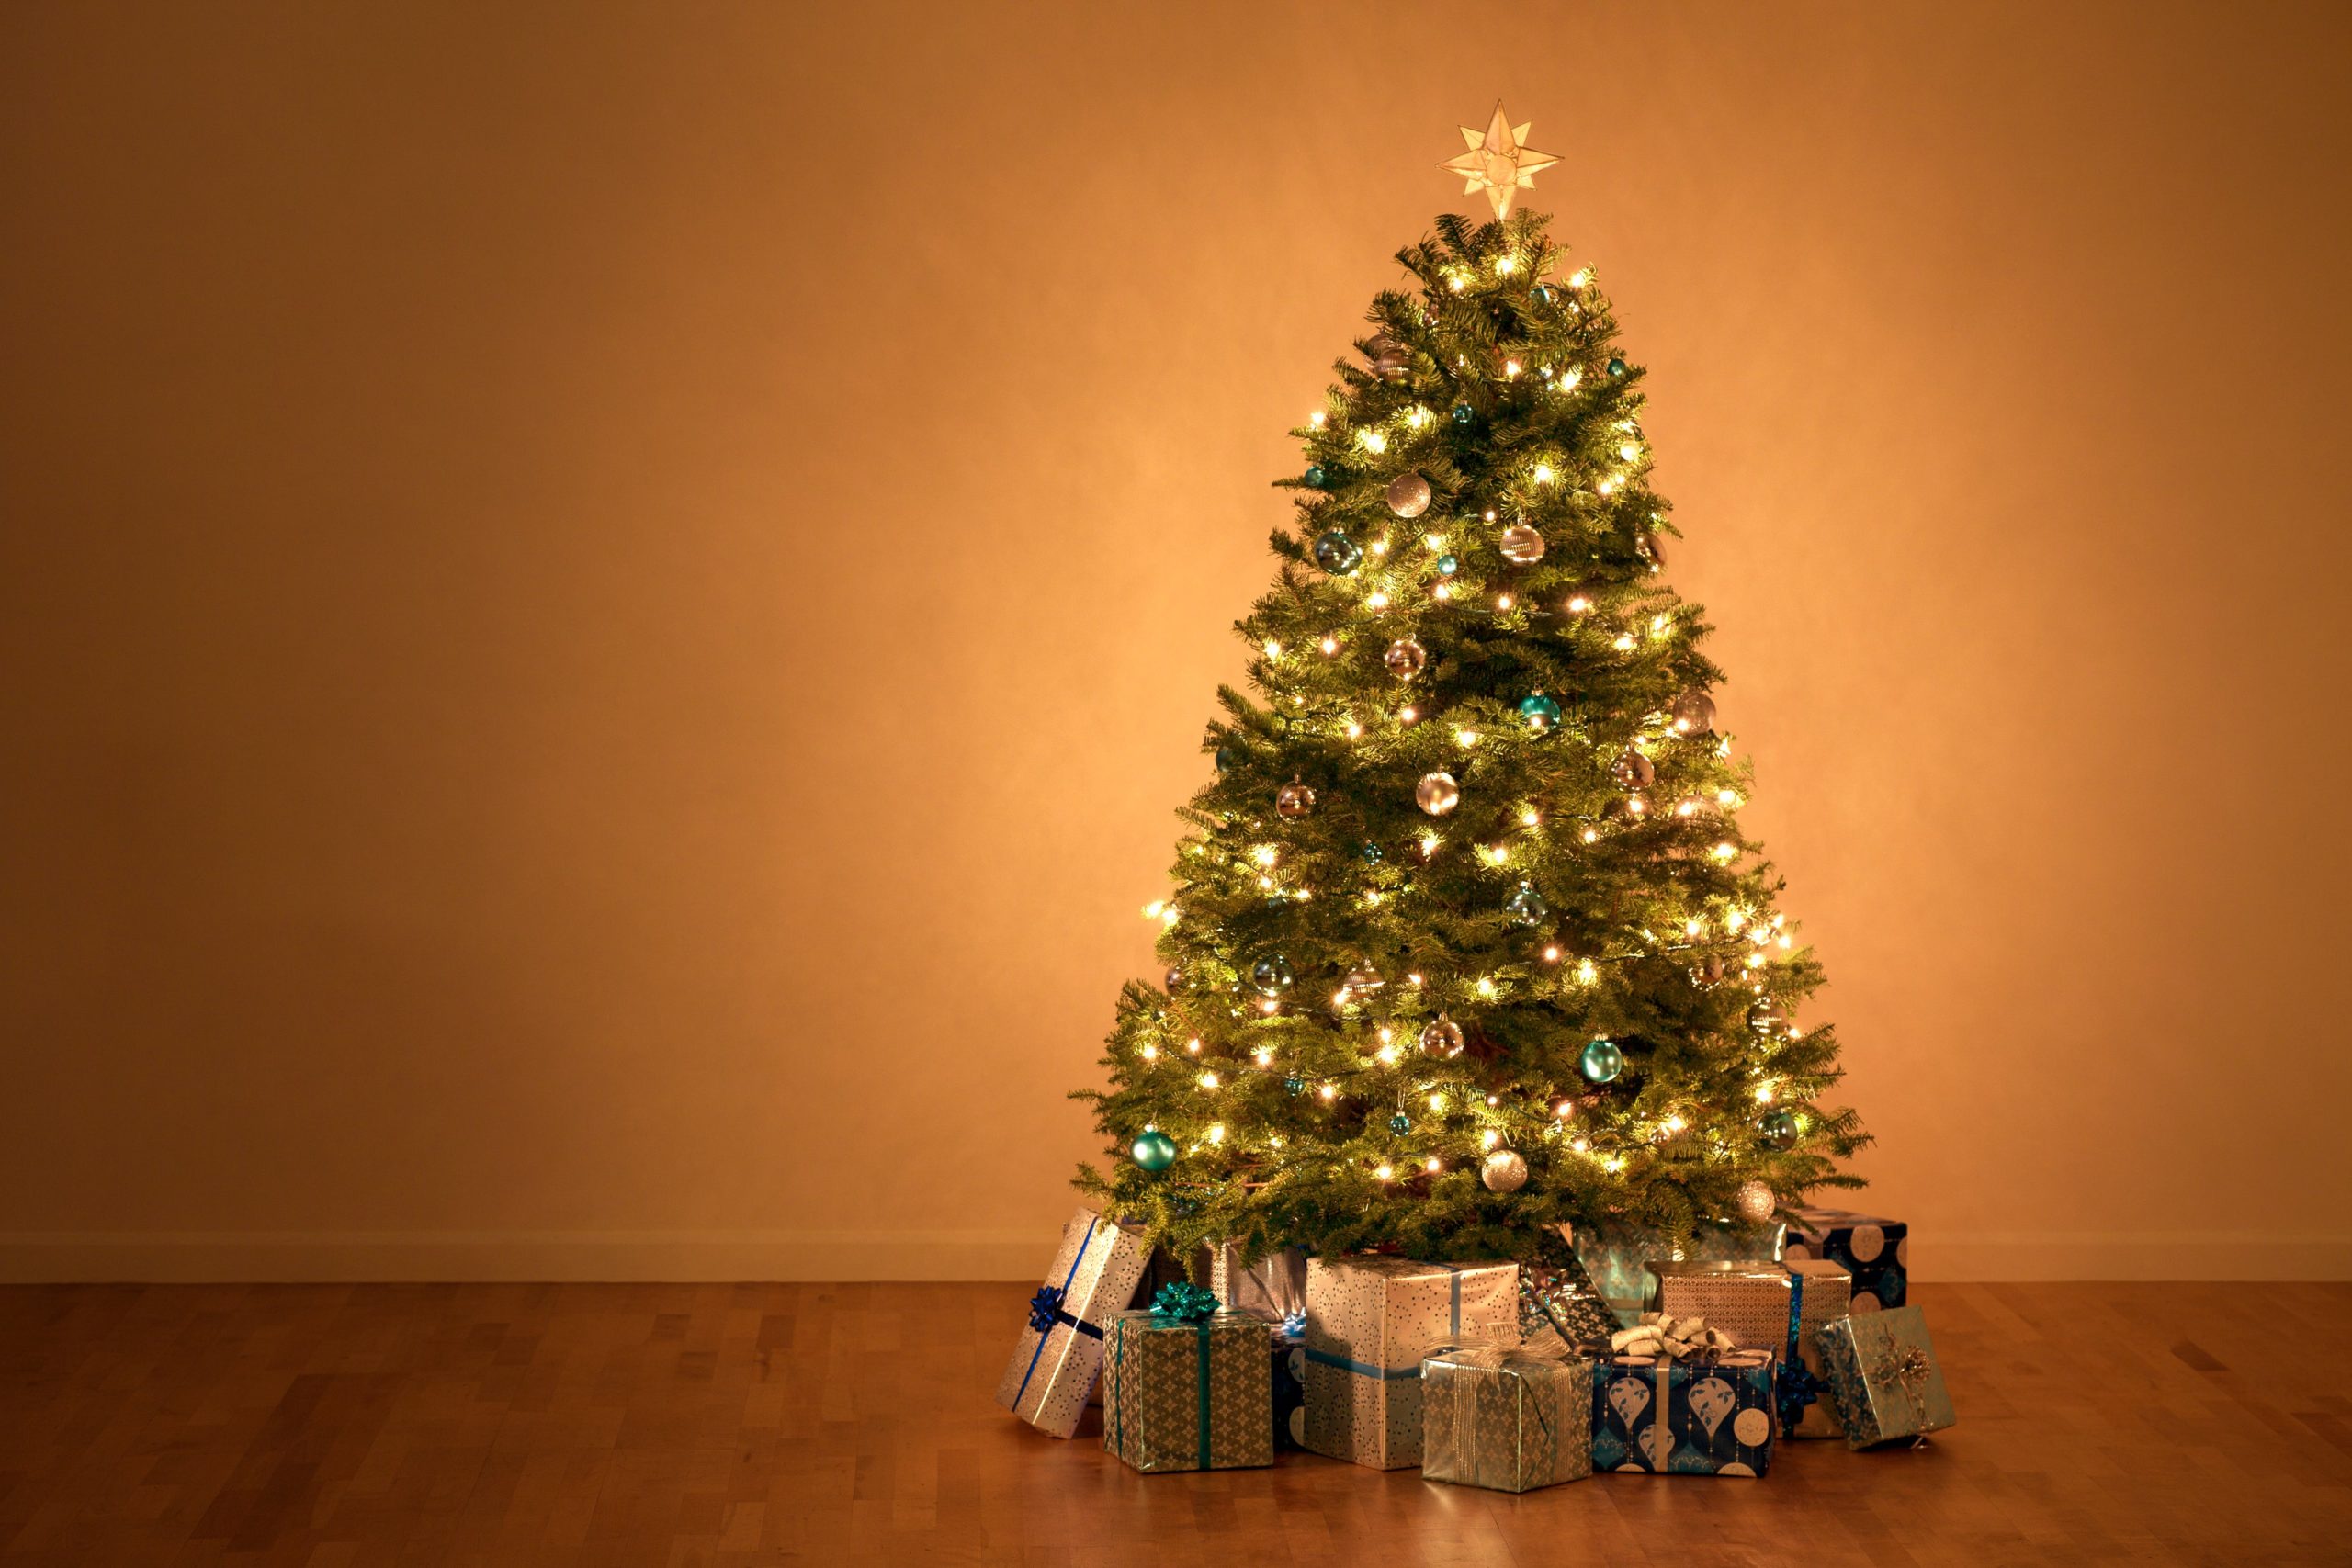 8 pre-lit Christmas trees that will brighten up holiday decor